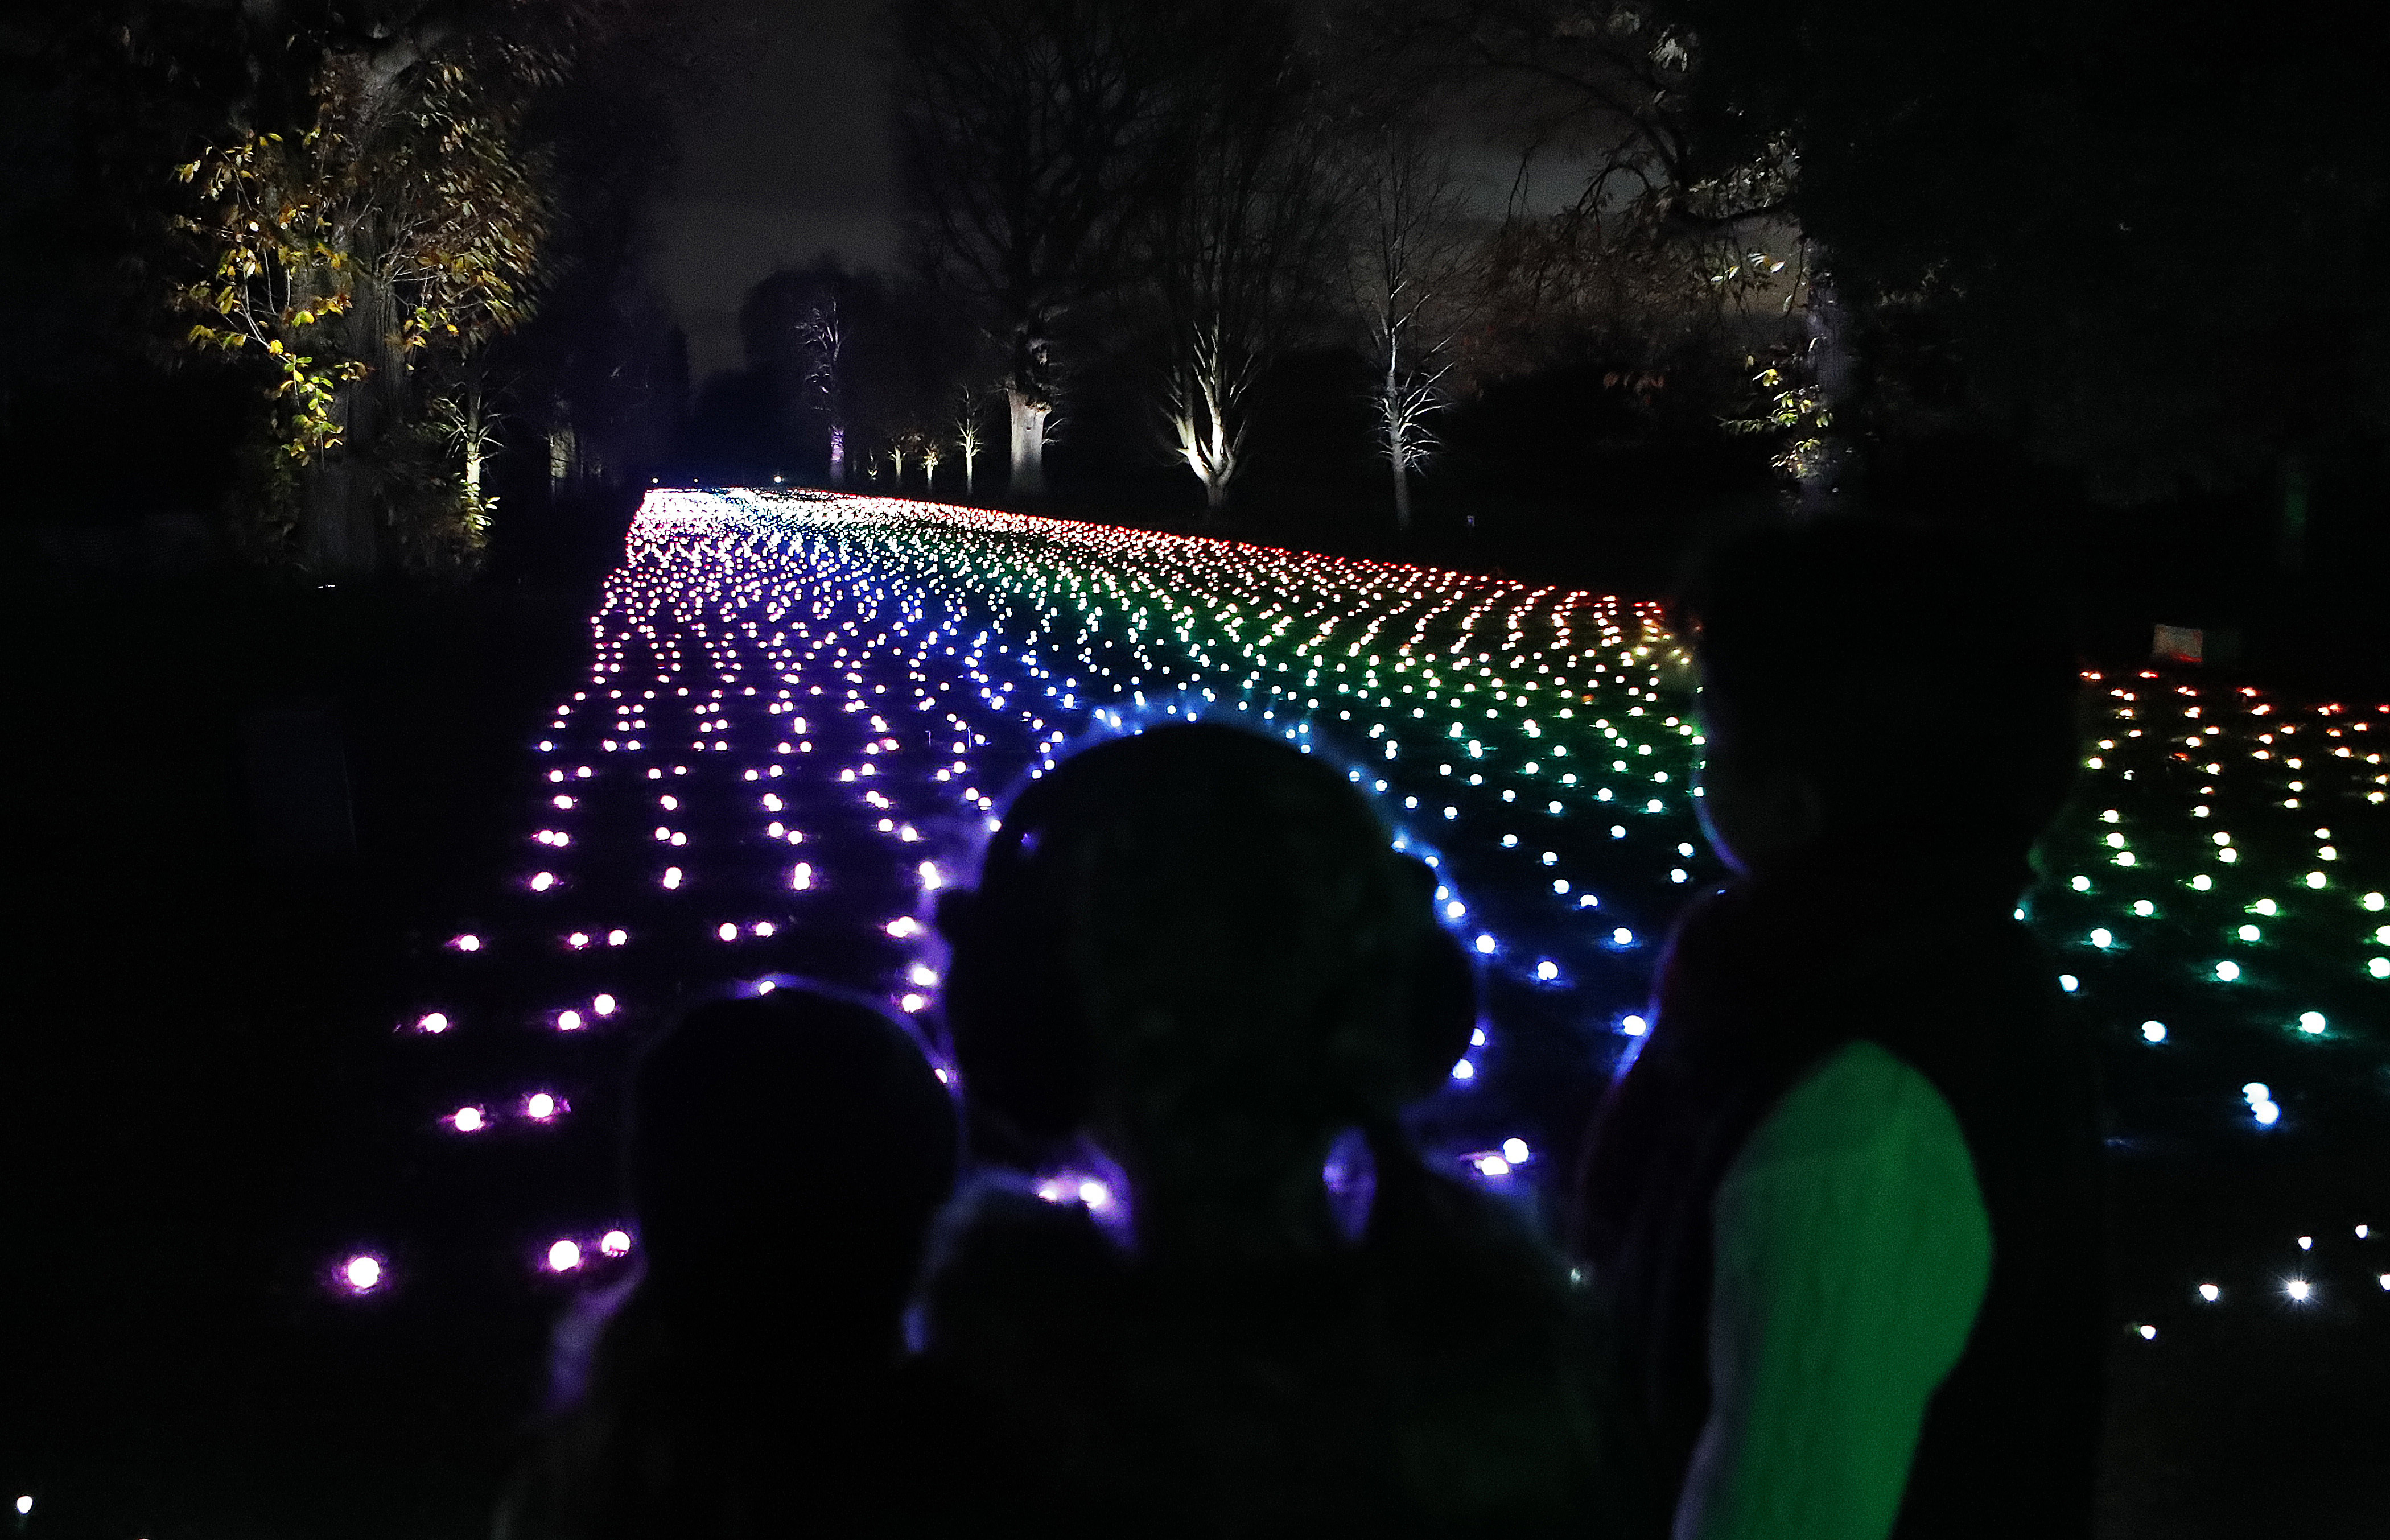 Visitors watch the field of light that is part of the illuminated trail through Kew Gardens magnificent after-dark landscape, lit up by over one million twinkling lights in London, Wednesday, Nov. 21, 2018. The spectacular light and sound installations run from 22, November 2018 – 5, January 2019.(AP Photo/Frank Augstein)